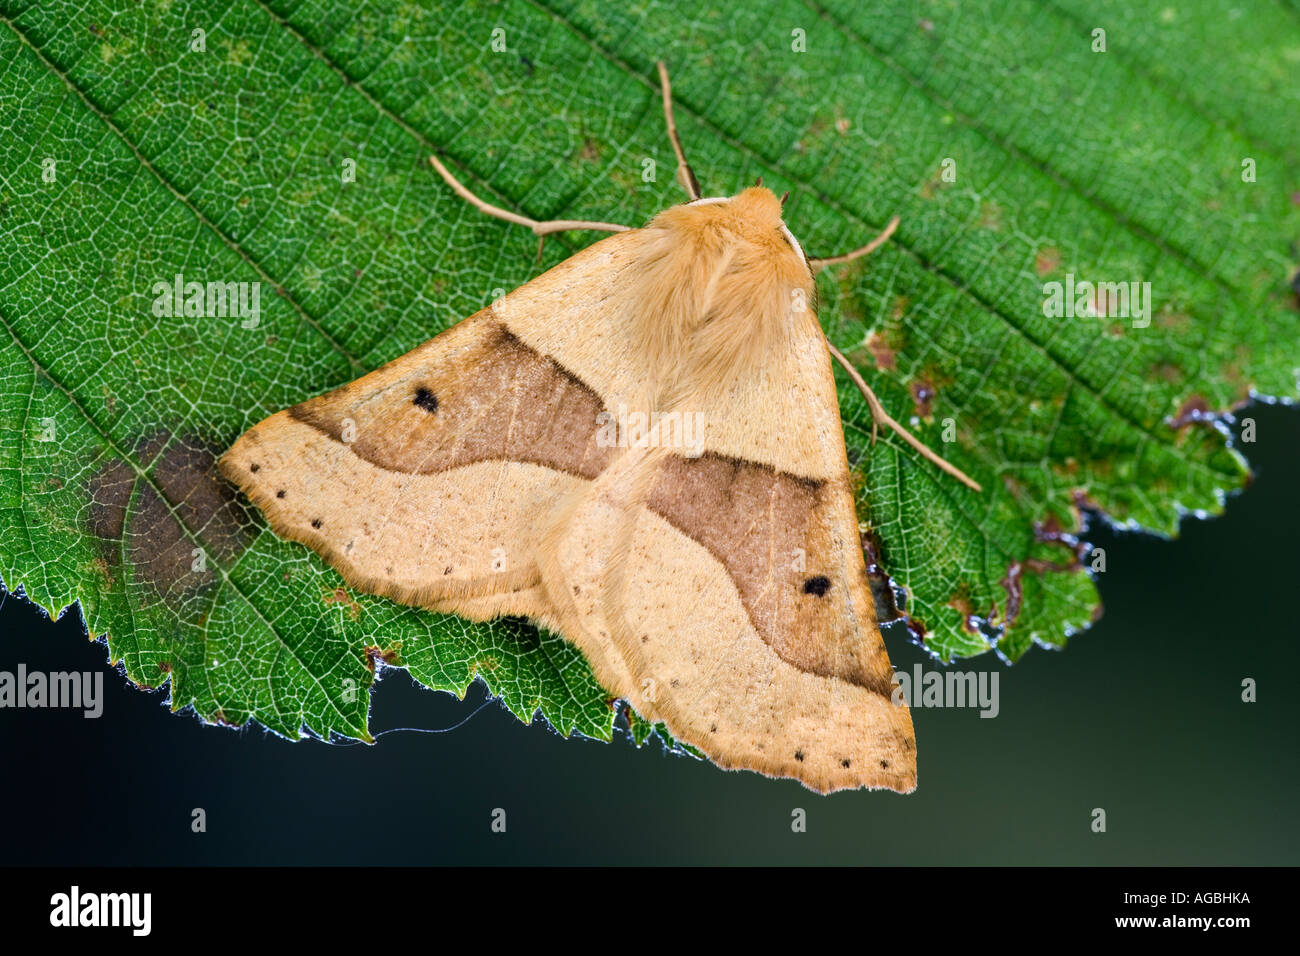 Scalloped Oak Crocallis elinguaria at rest on leaf showing markings and detail Potton Bedfordshire Stock Photo